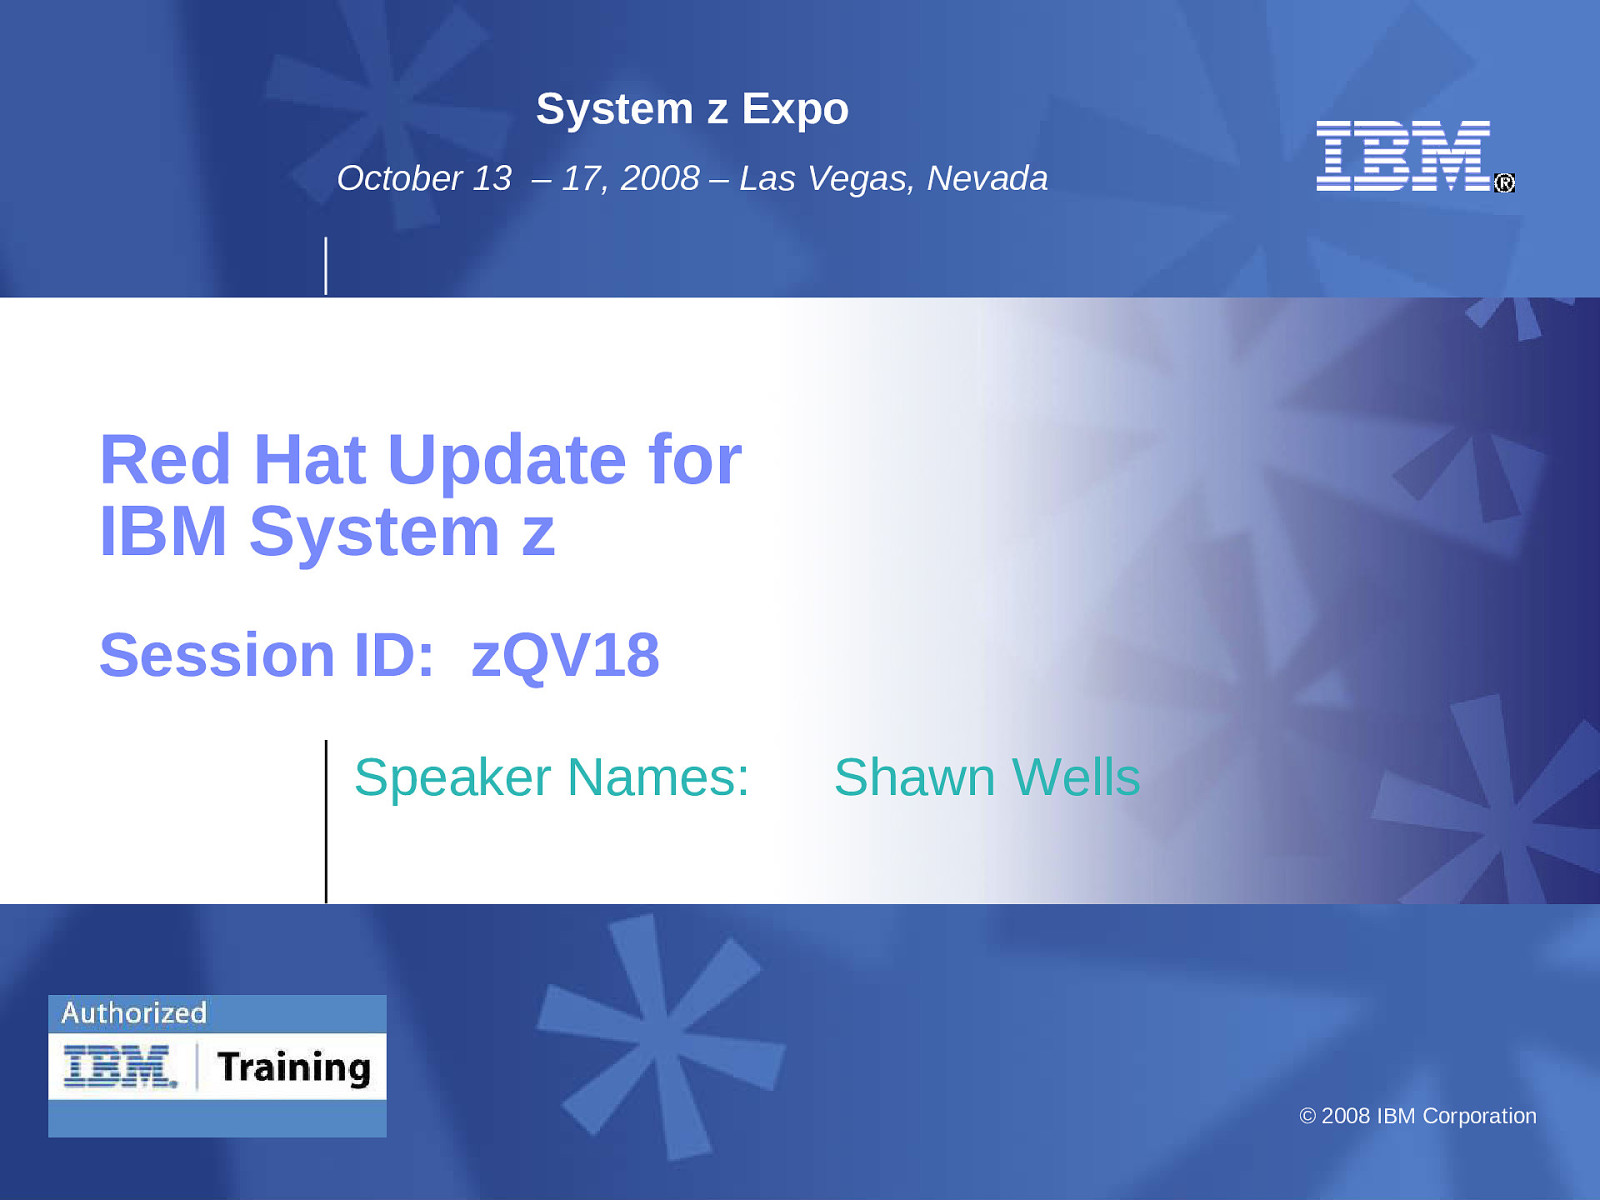 Session ID zQV18: Red Hat Update for IBM System z